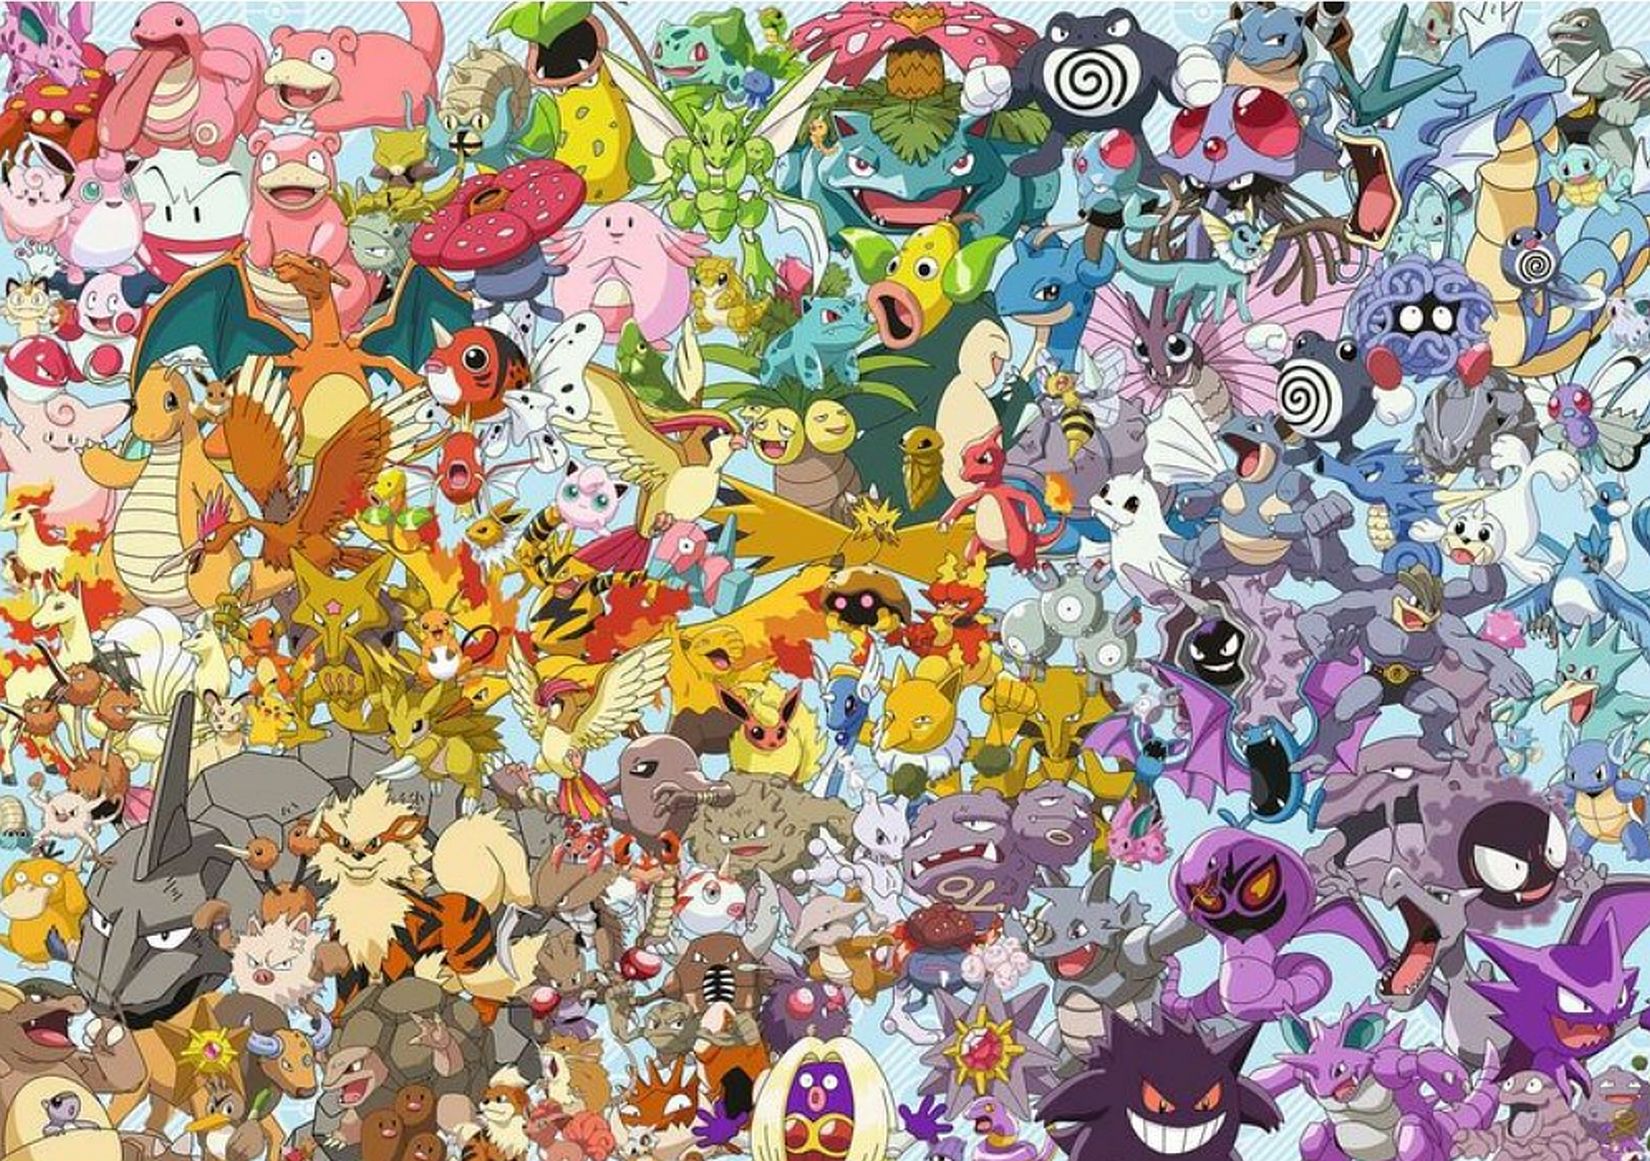 Image for There are now 1008 Pokemon in the wild